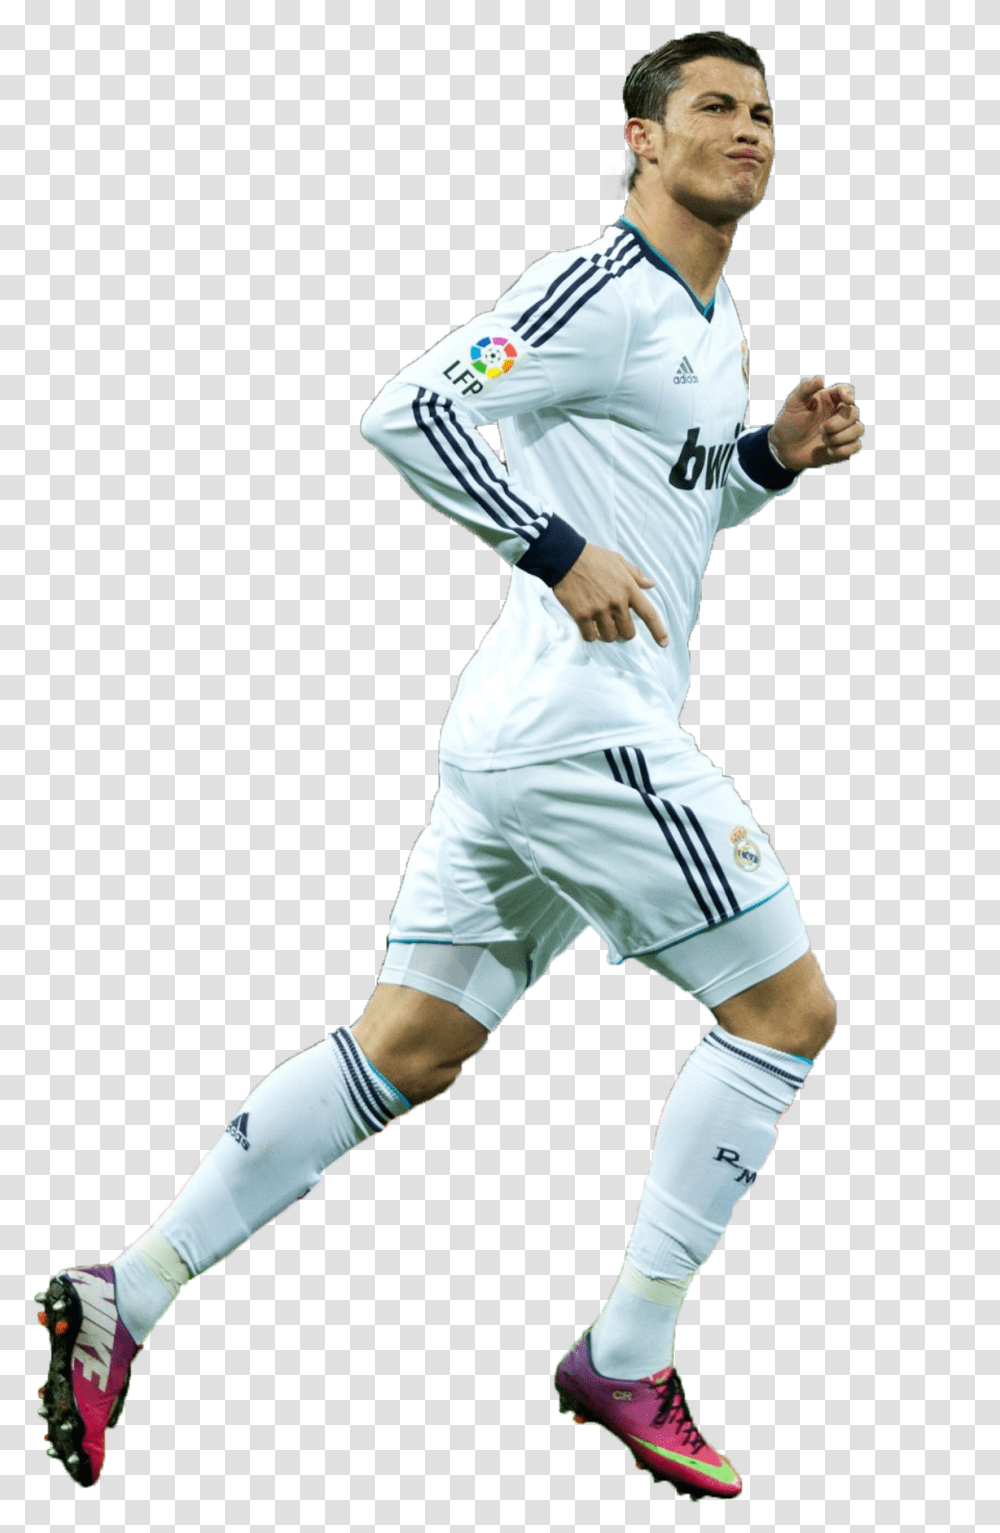 Gareth Bale Wallpaper 2018 Hd 79 Images Player, Person, People, Football, Team Sport Transparent Png